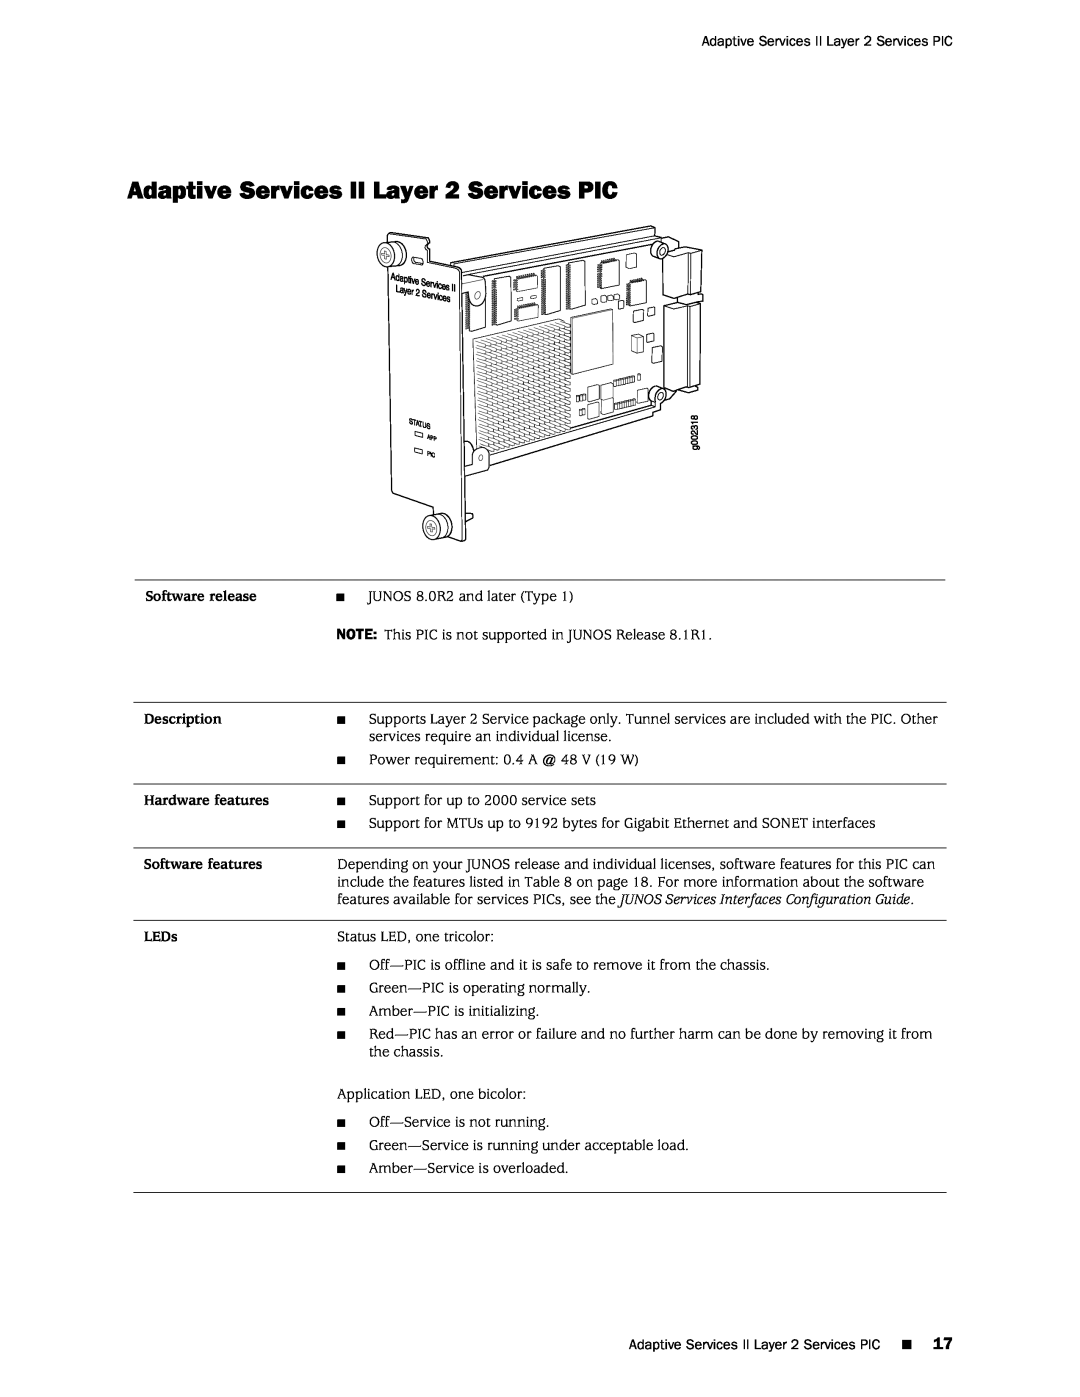 Juniper Networks M120 Adaptive Services II Layer 2 Services PIC, Software release, Description, Hardware features, LEDs 